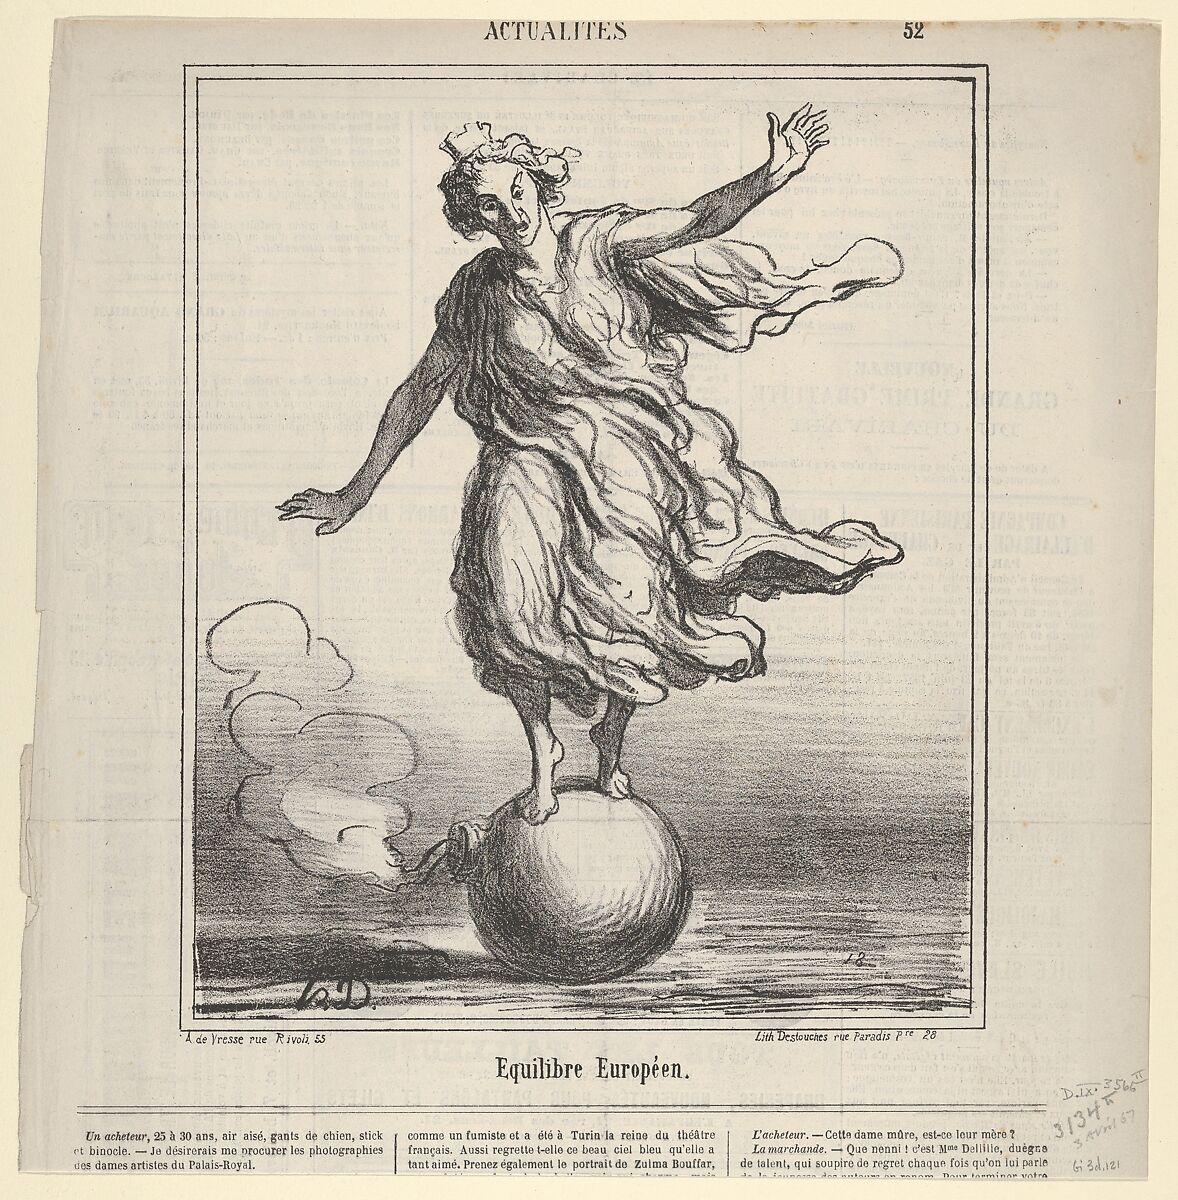 Equilibre Europeen, from Actualités, published in le Charivari, April 3, 1867, Honoré Daumier (French, Marseilles 1808–1879 Valmondois), Lithograph 